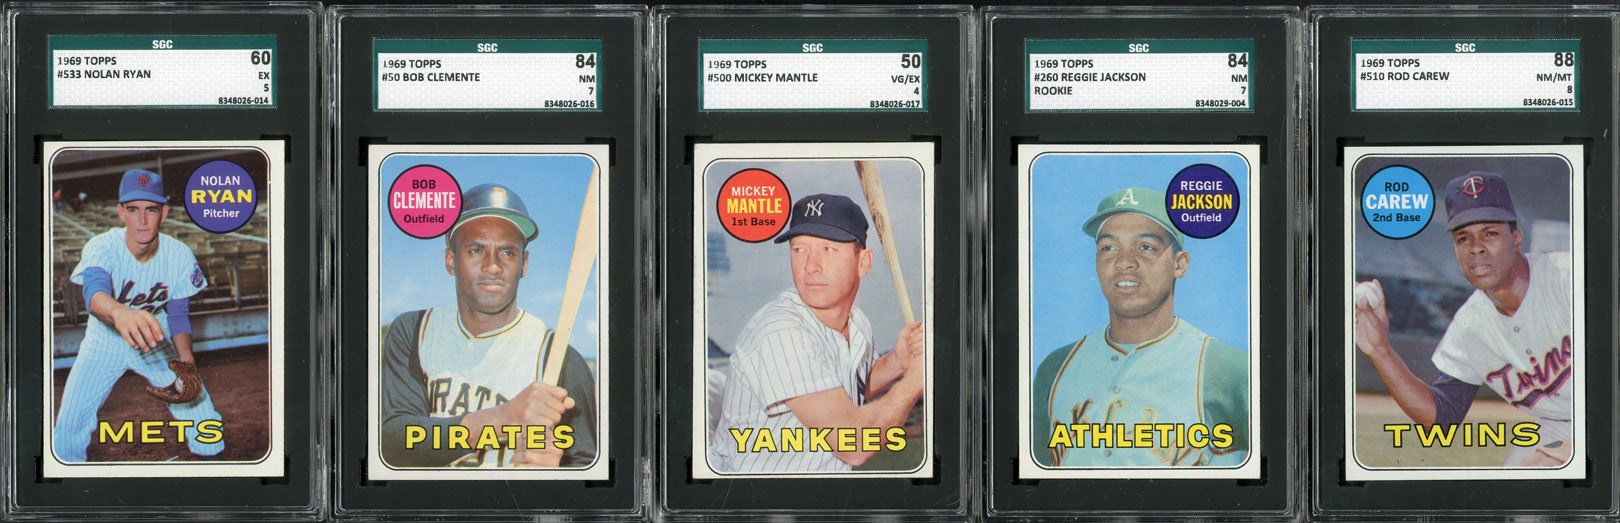 Baseball and Trading Cards - 1969 Topps HIGH GRADE Complete Set (664 Cards - 5 SGC Graded)